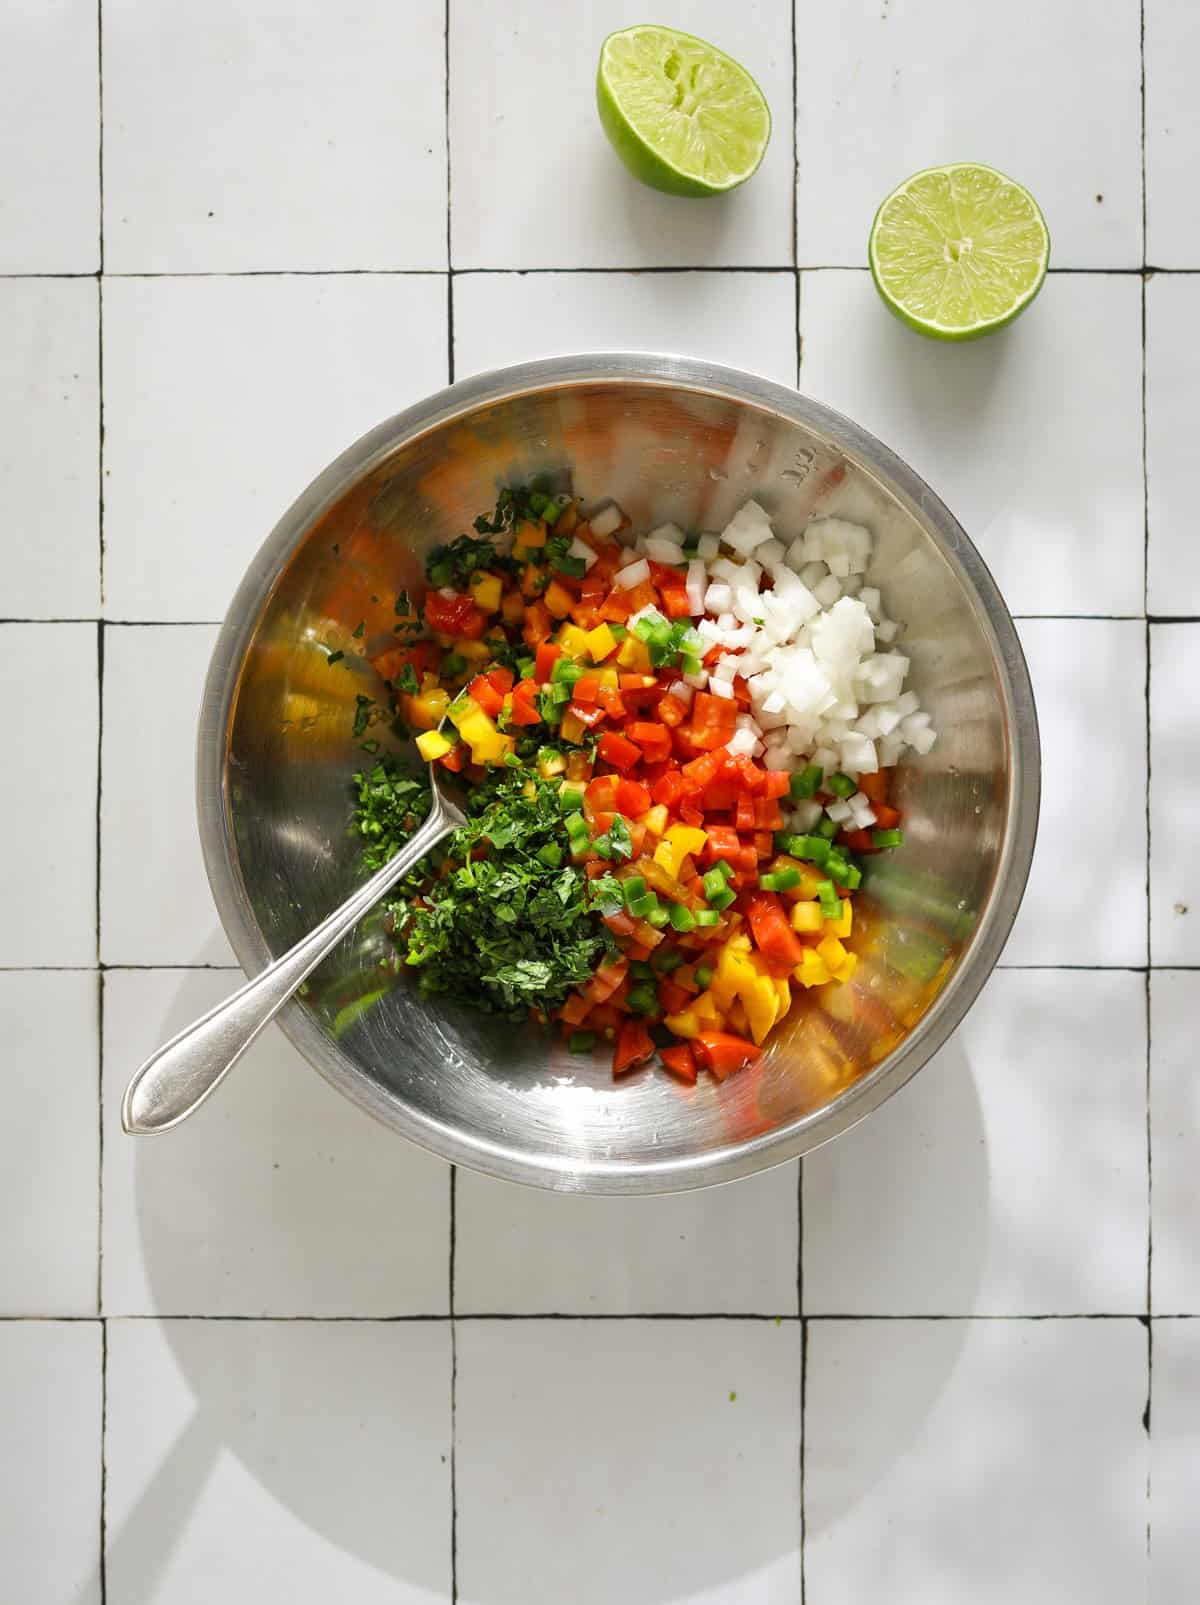 A small stainless steel mixing bowl filled with diced pico de gallo ingredients and a silver spoon for mixing.